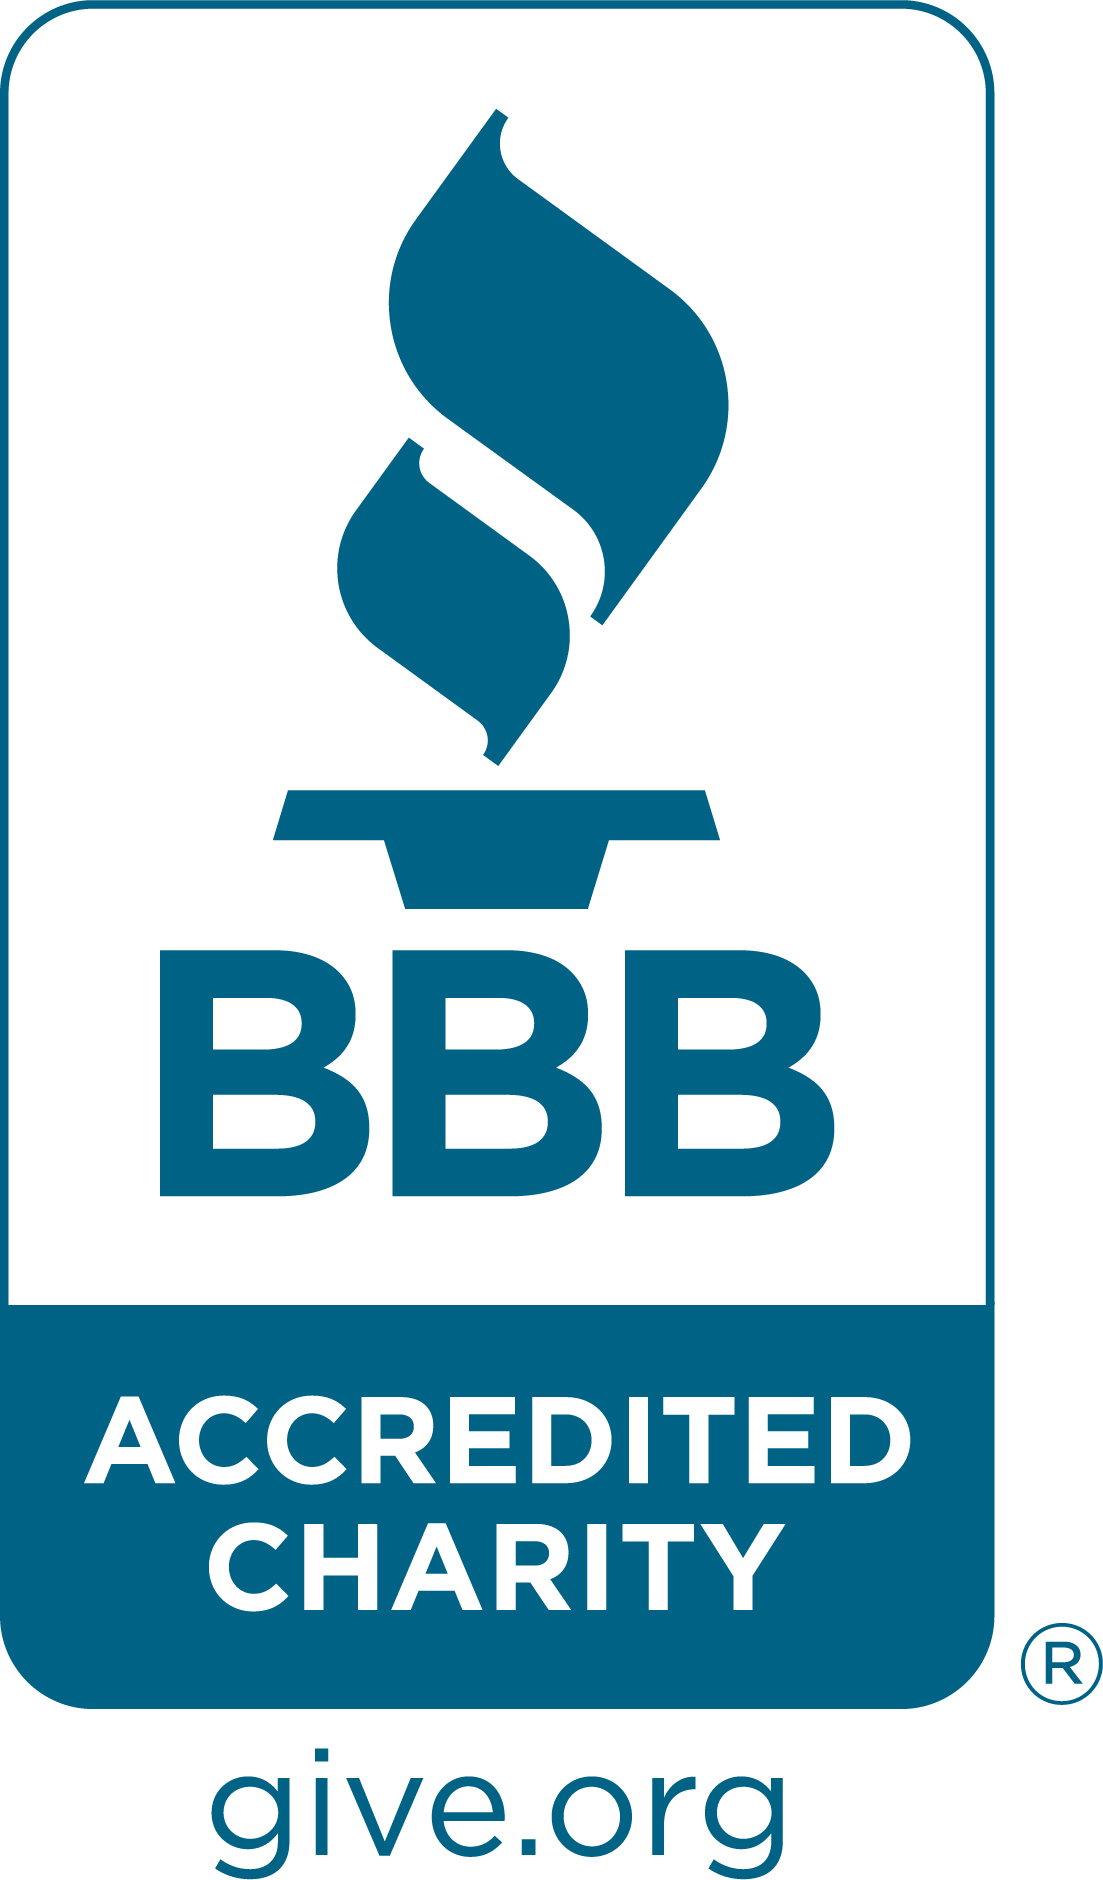 BBB Accredited Charity logo from give.org showing a blue flame above the letters "BBB" with the text "ACCREDITED CHARITY" and "give.org" below.